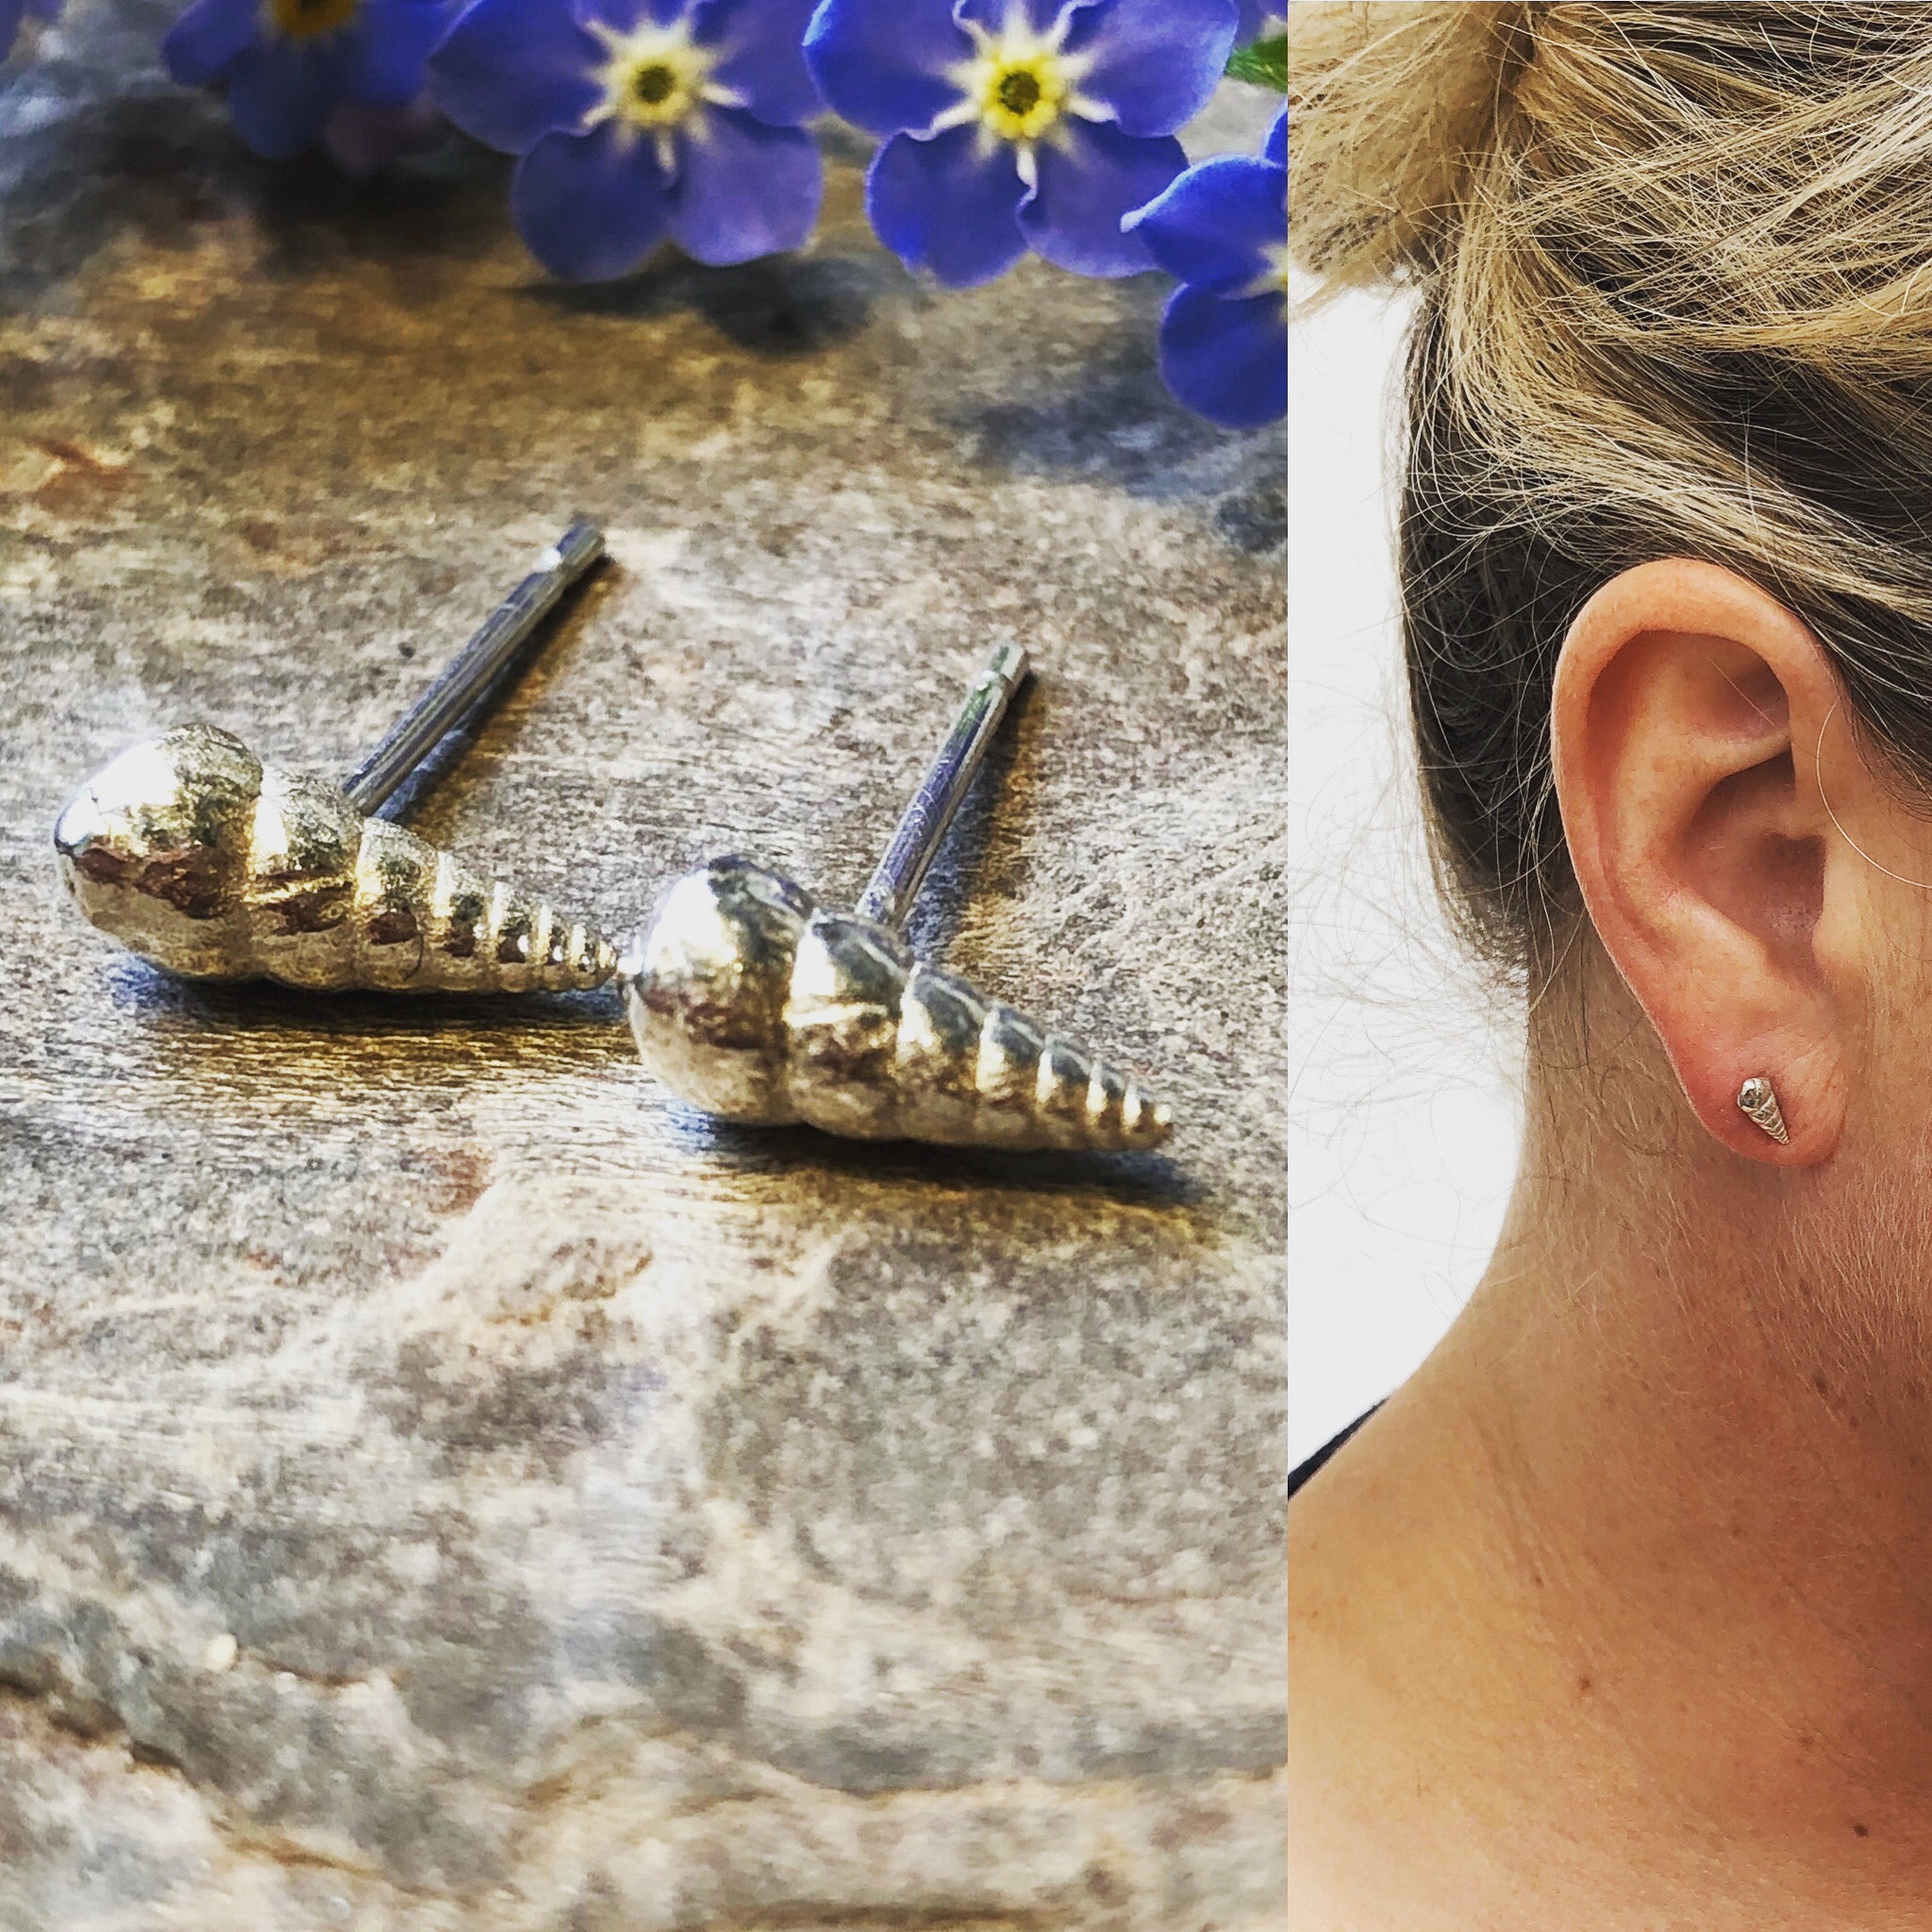 Twisted shell studs.